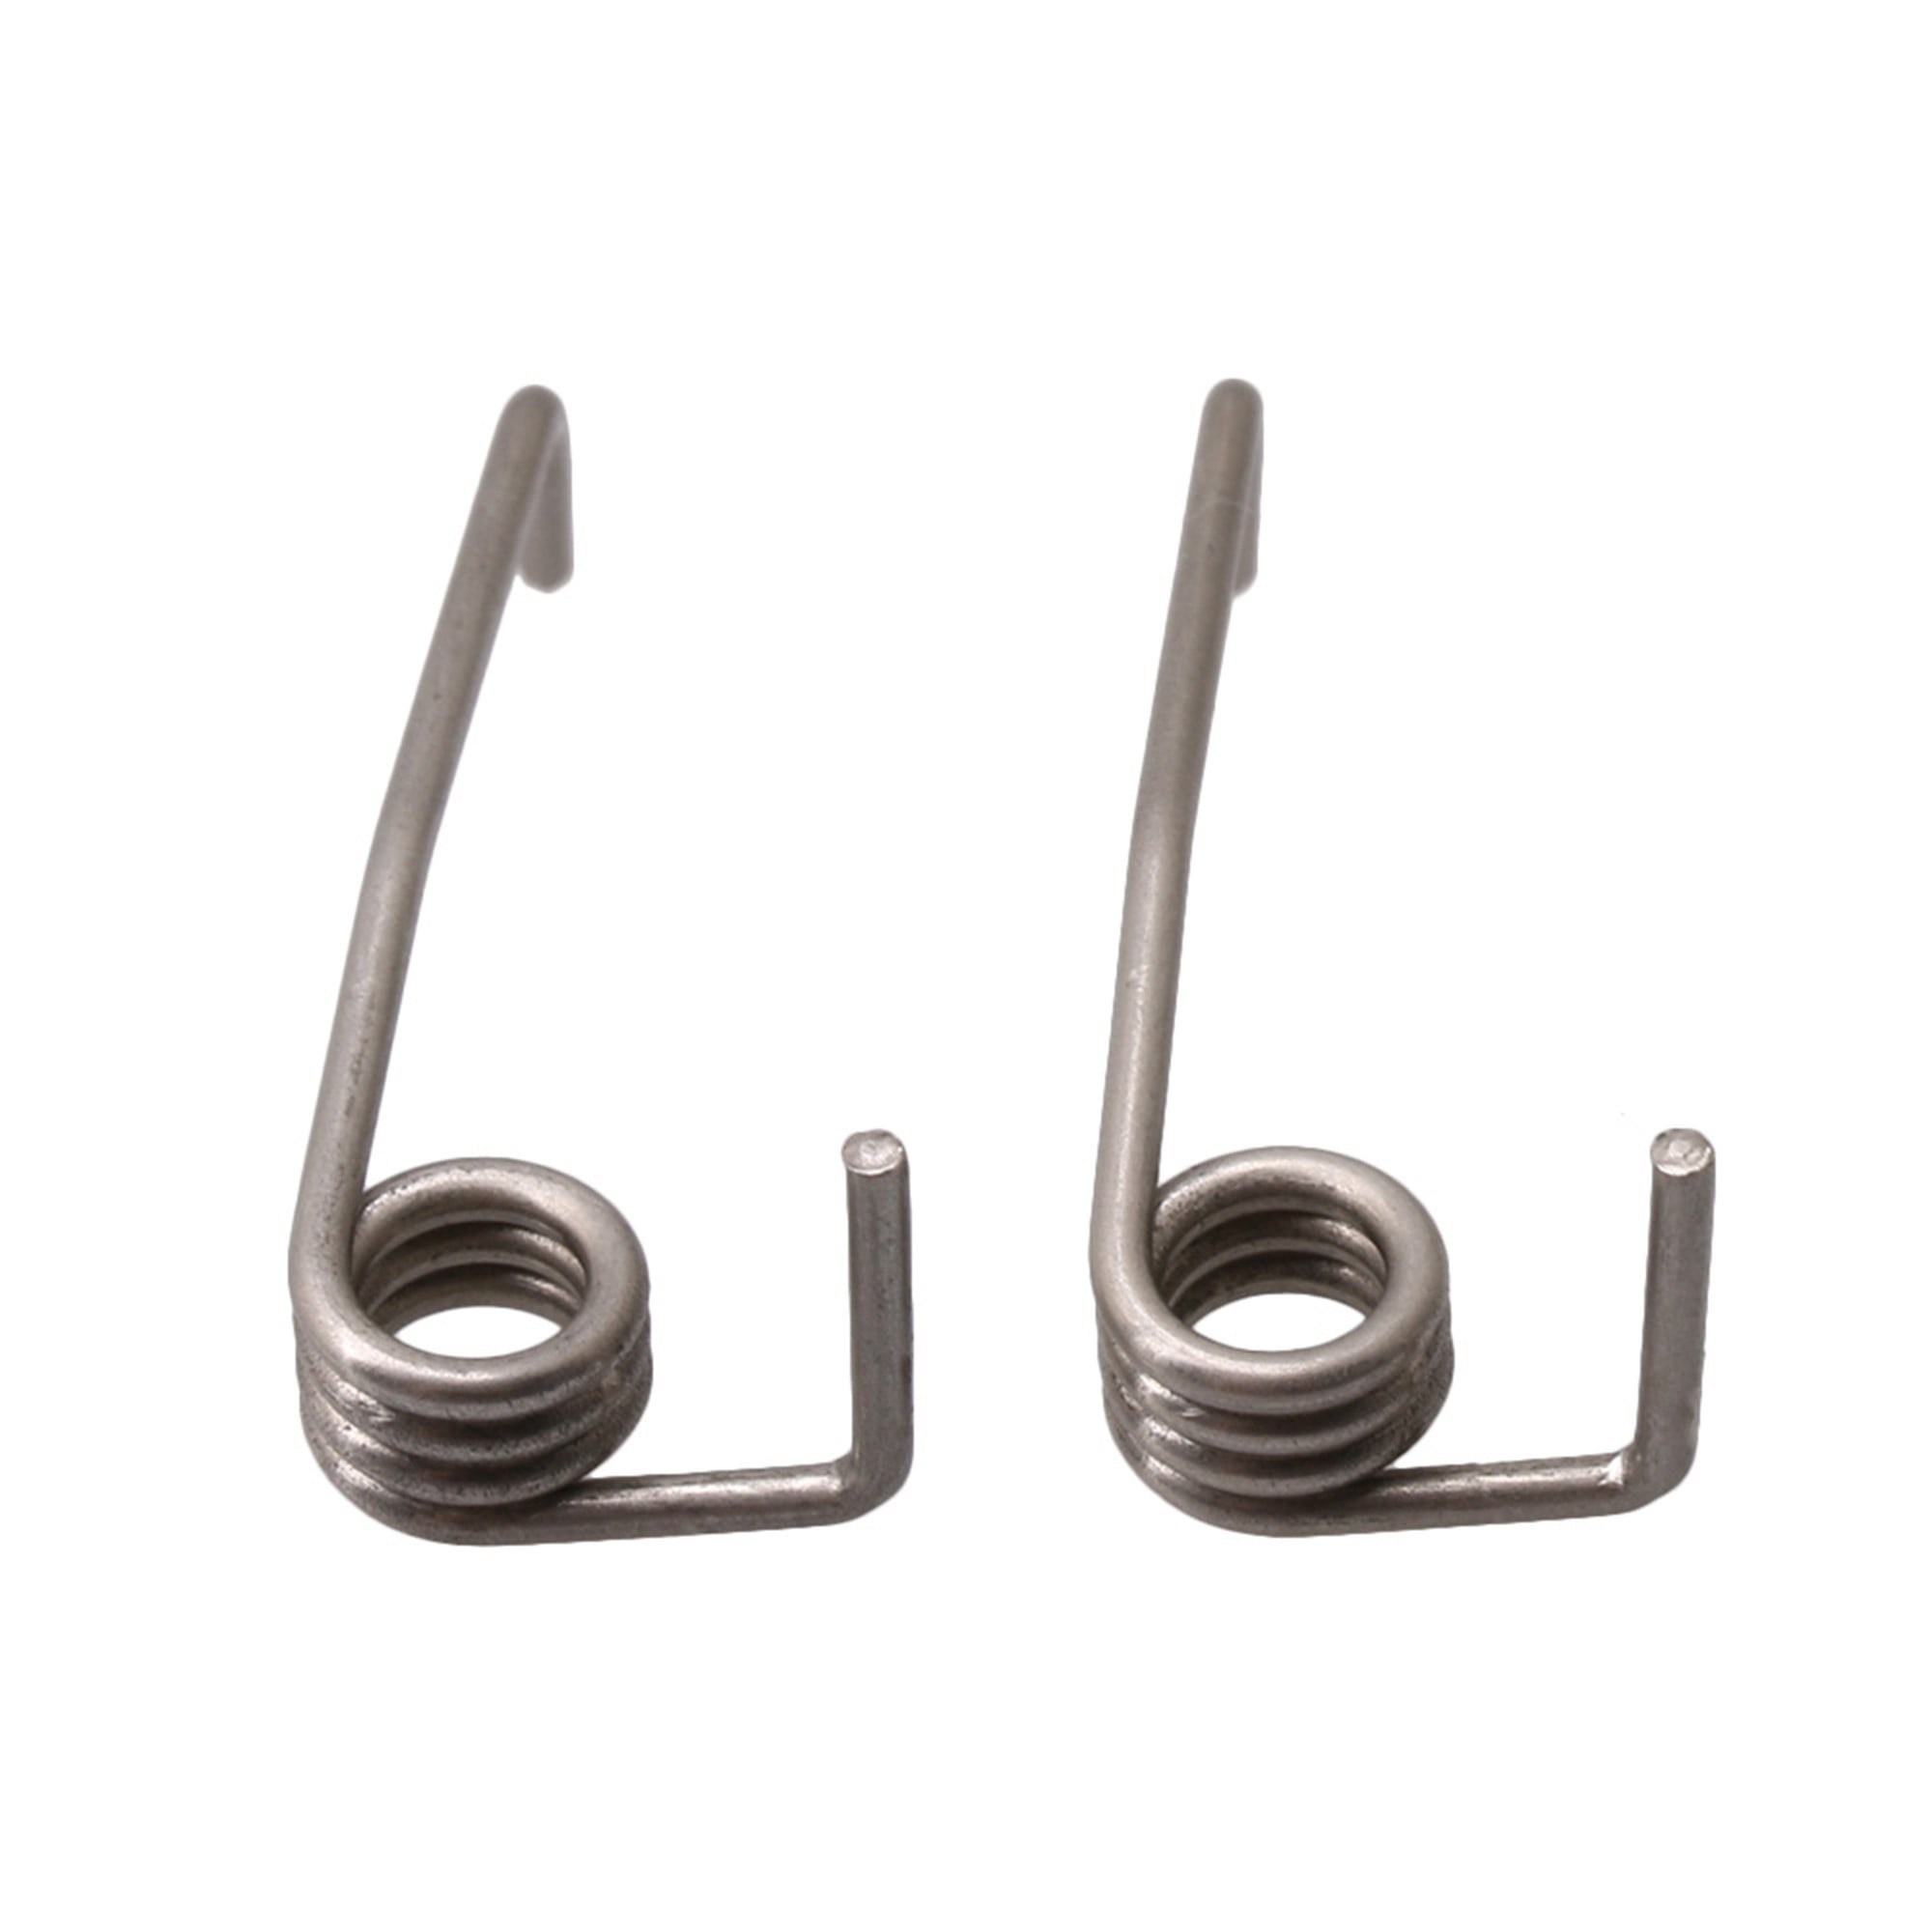 Details about   2 x Metal Refrigerator Divider Door Spring Replacement for Samsung DA81-01346A 